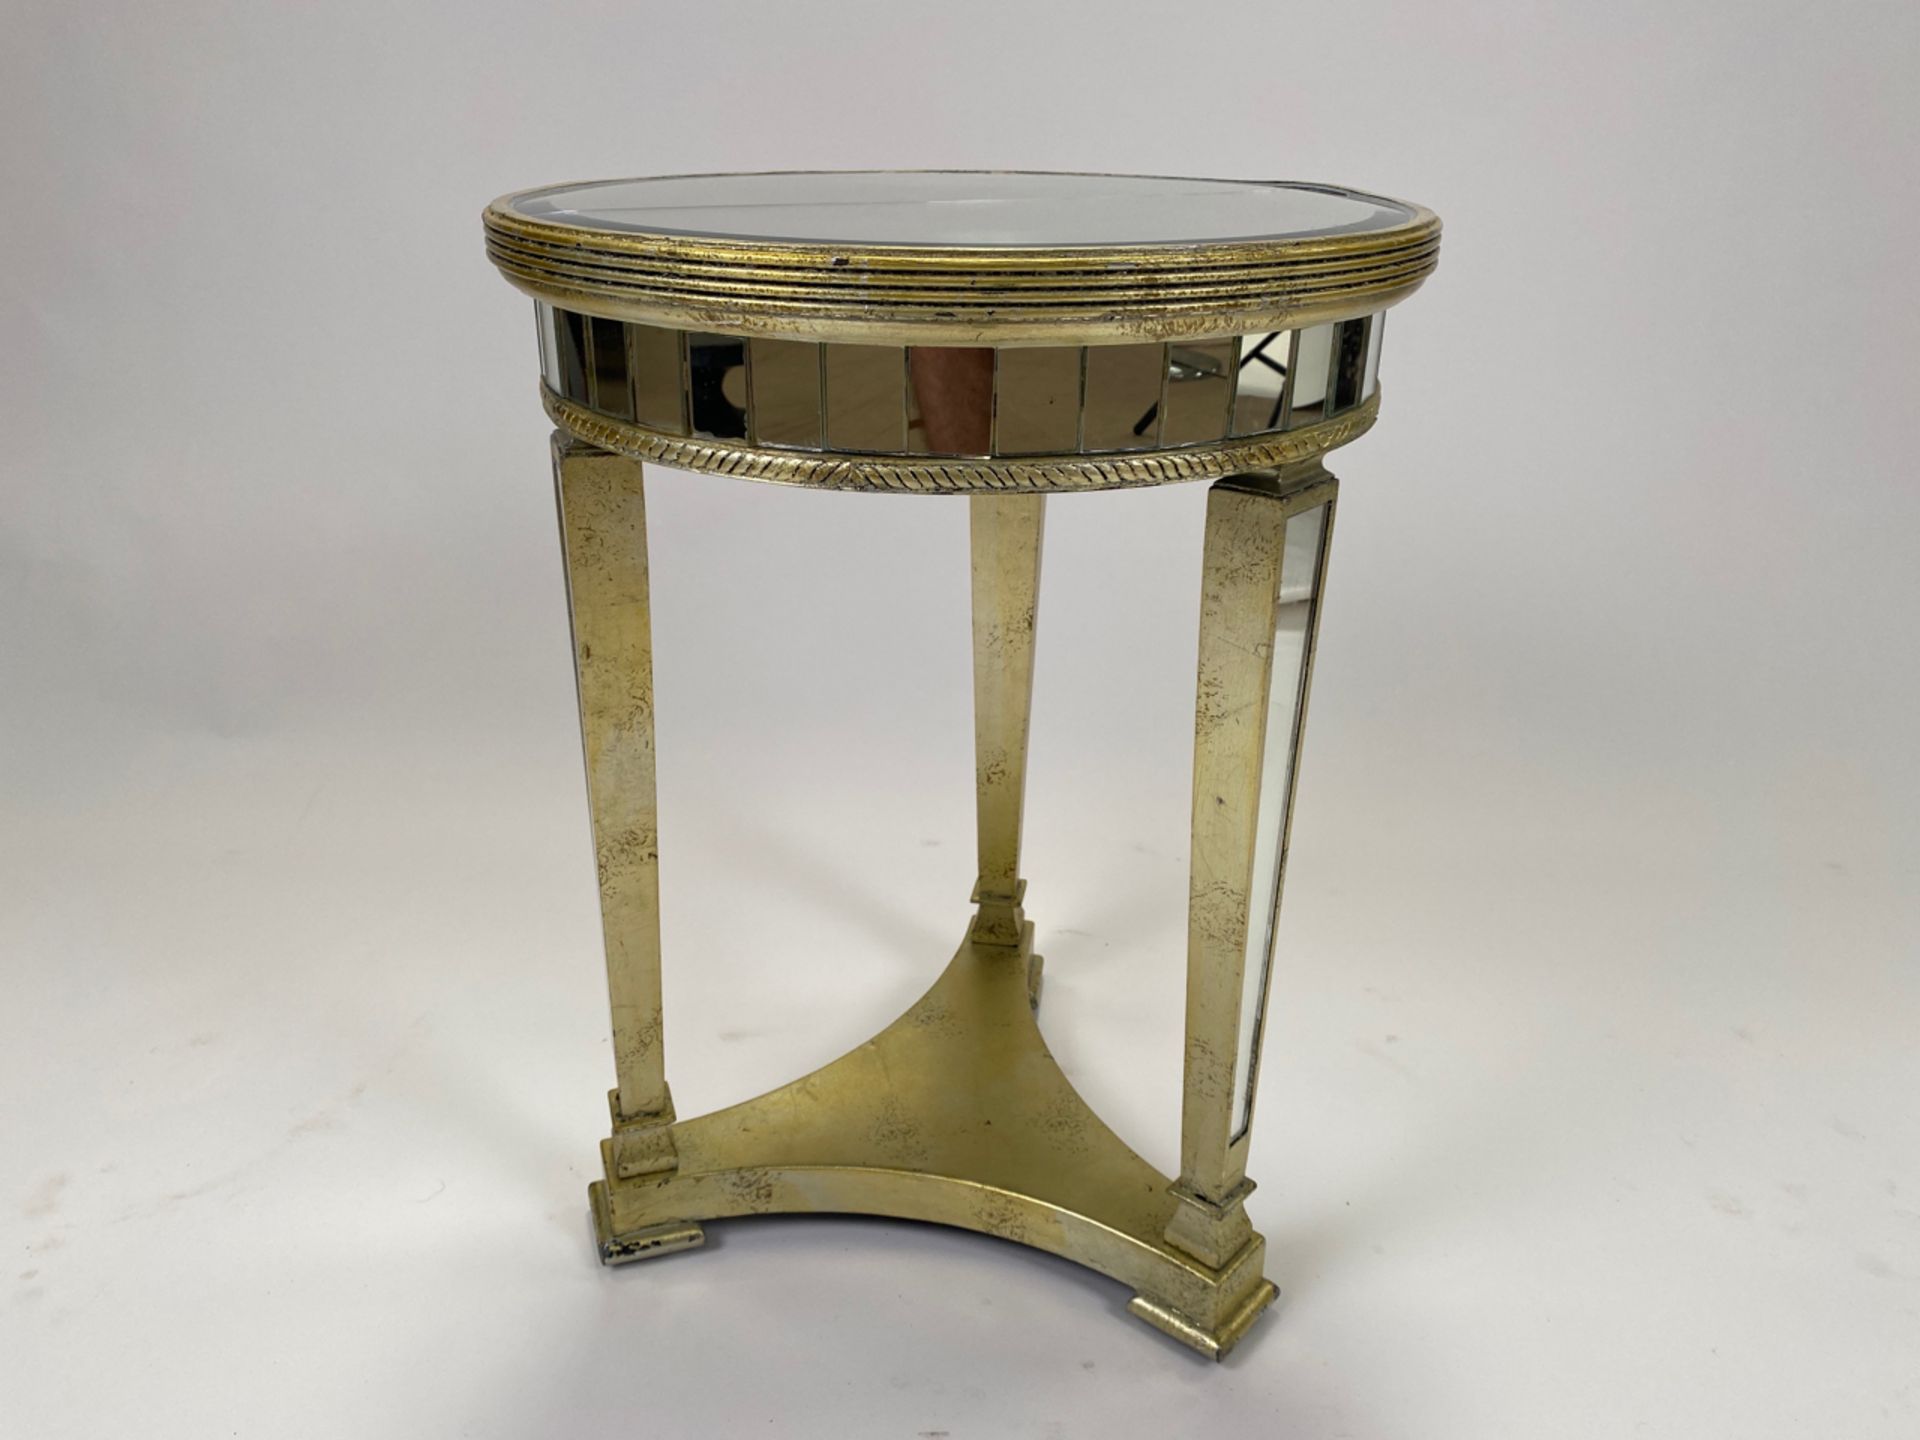 Art Deco Mirrored Pedestal Round Side Table Antiqued Ribbed